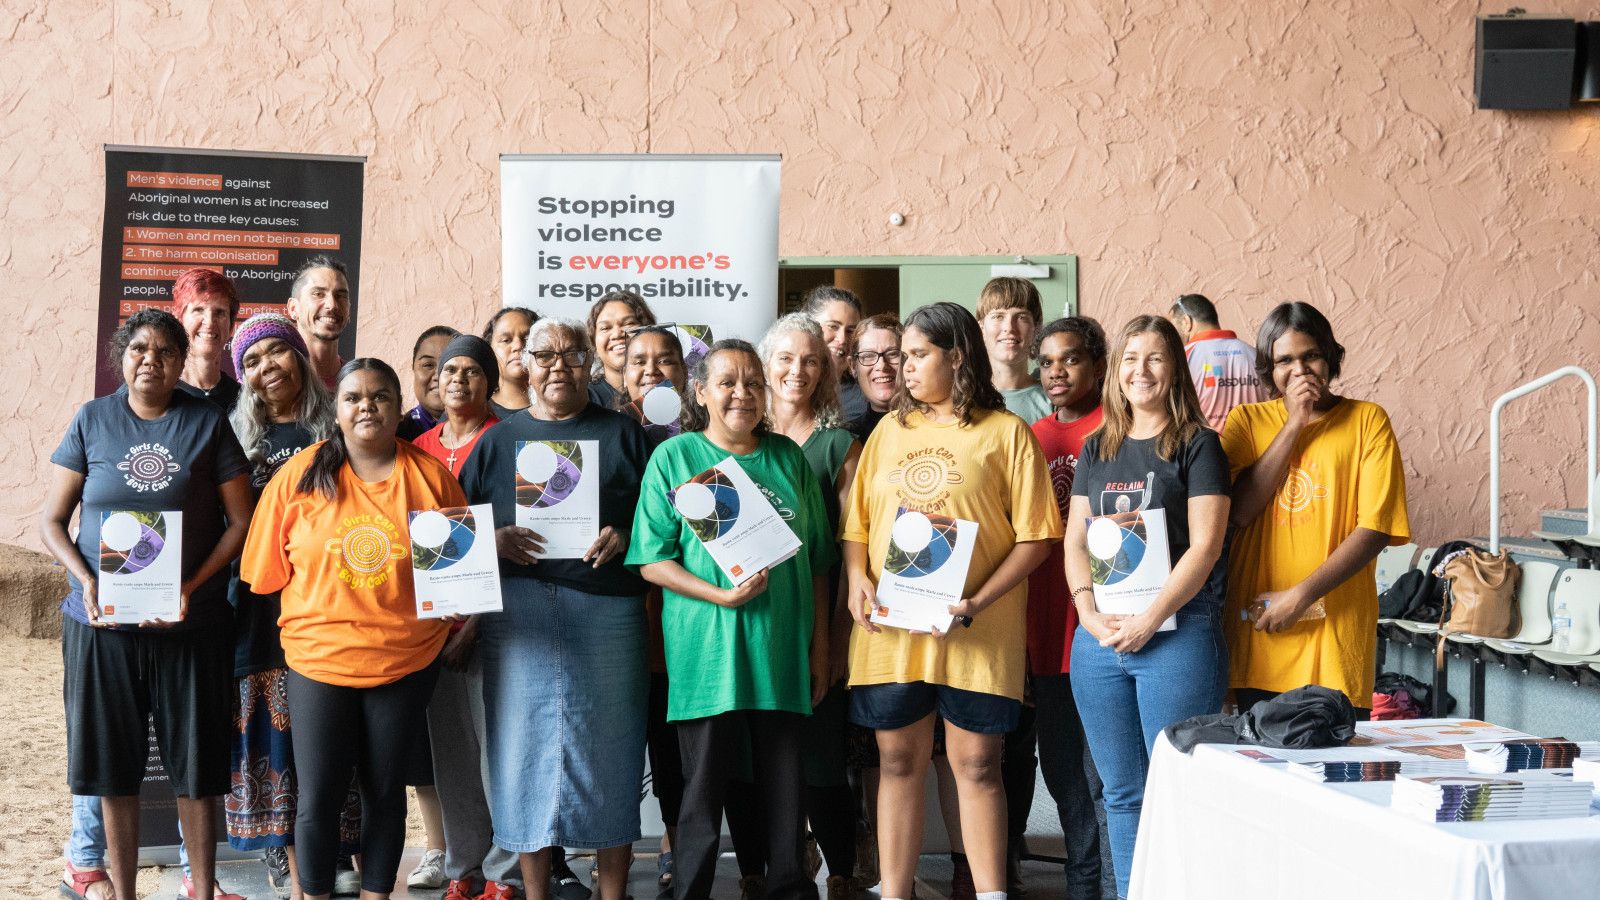 The Tangentyere Women's Family Safety Group, with community champions and partners from Larapinta Child and Family Centre, Tangentyere Learning Centre, Connected Beginnings, and The Equality Institute. Credit: The Equality Institute/Jesse Tyssen